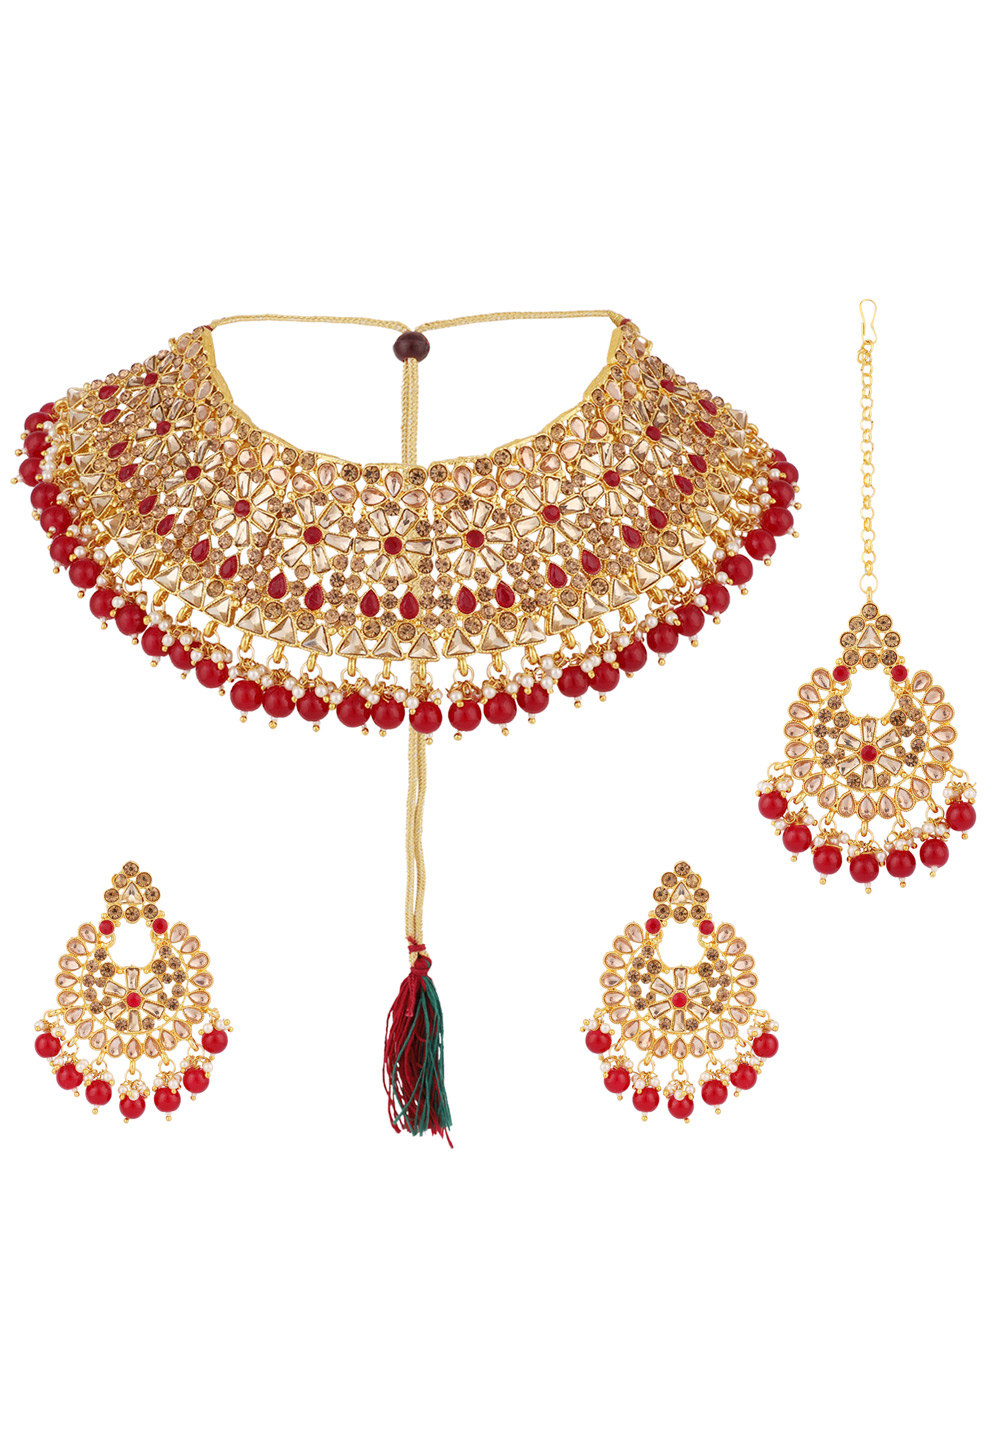 Red Alloy Necklace Set With Earrings and Maang Tikka 223057